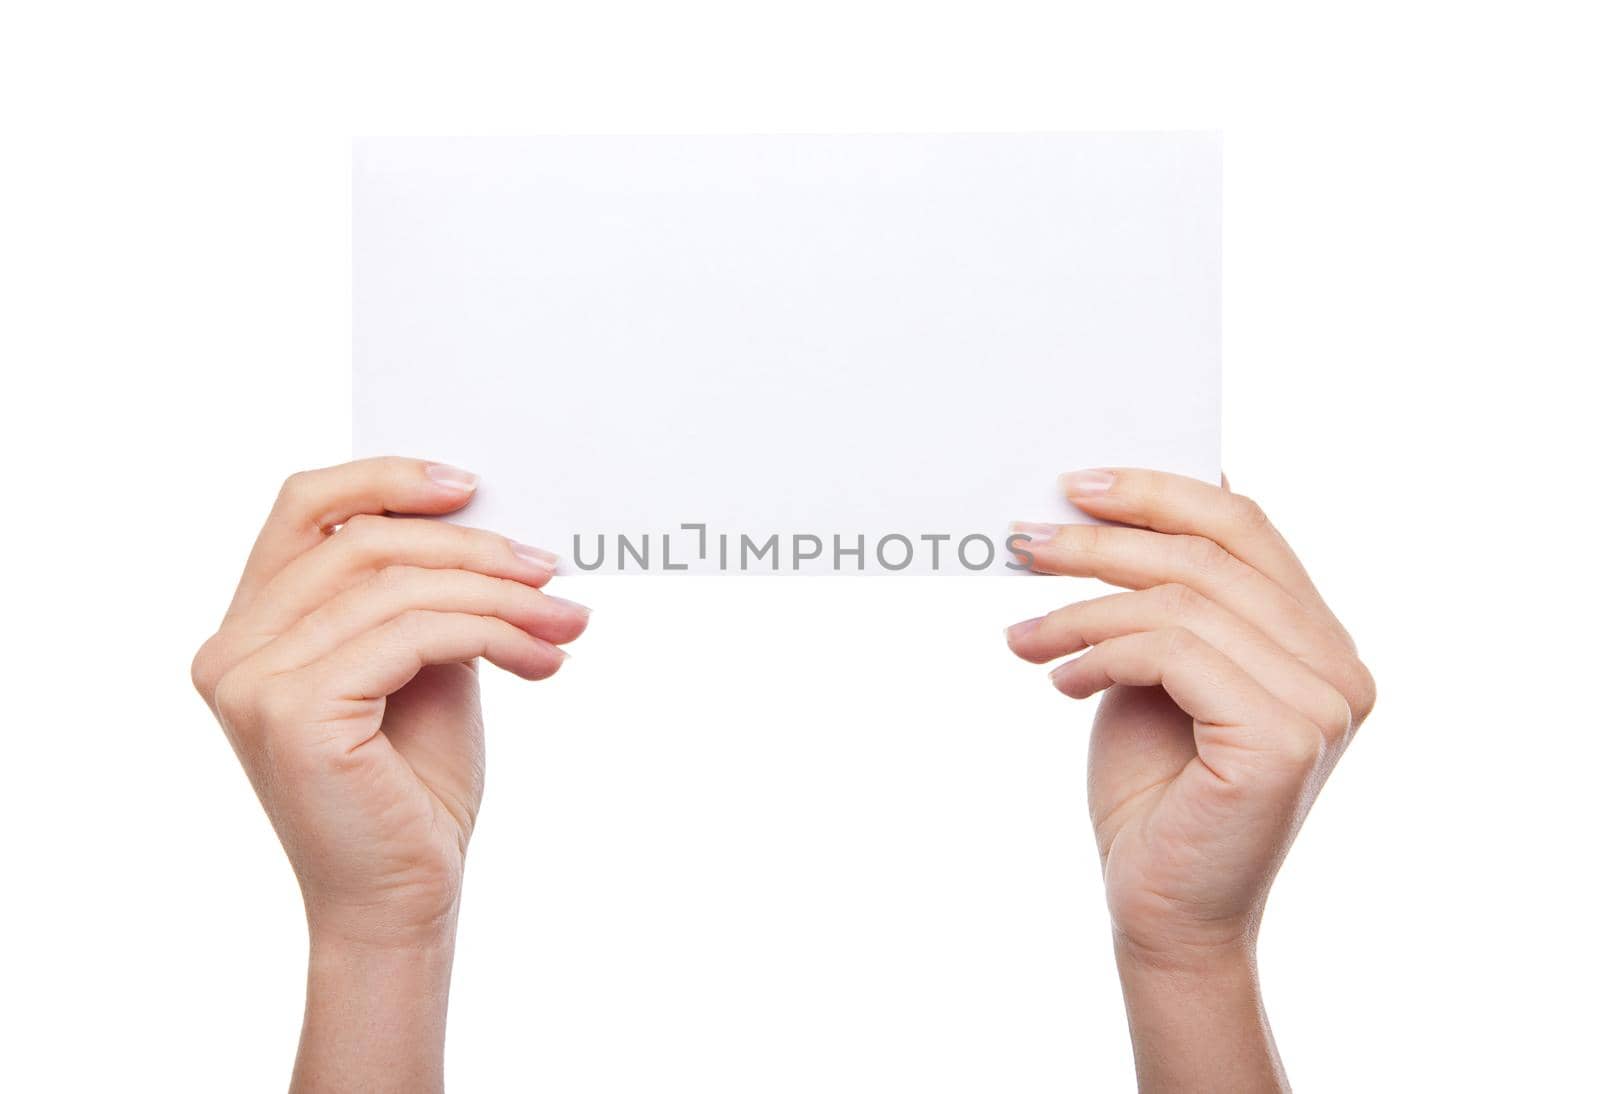 hand holding blank paper isolated on white background